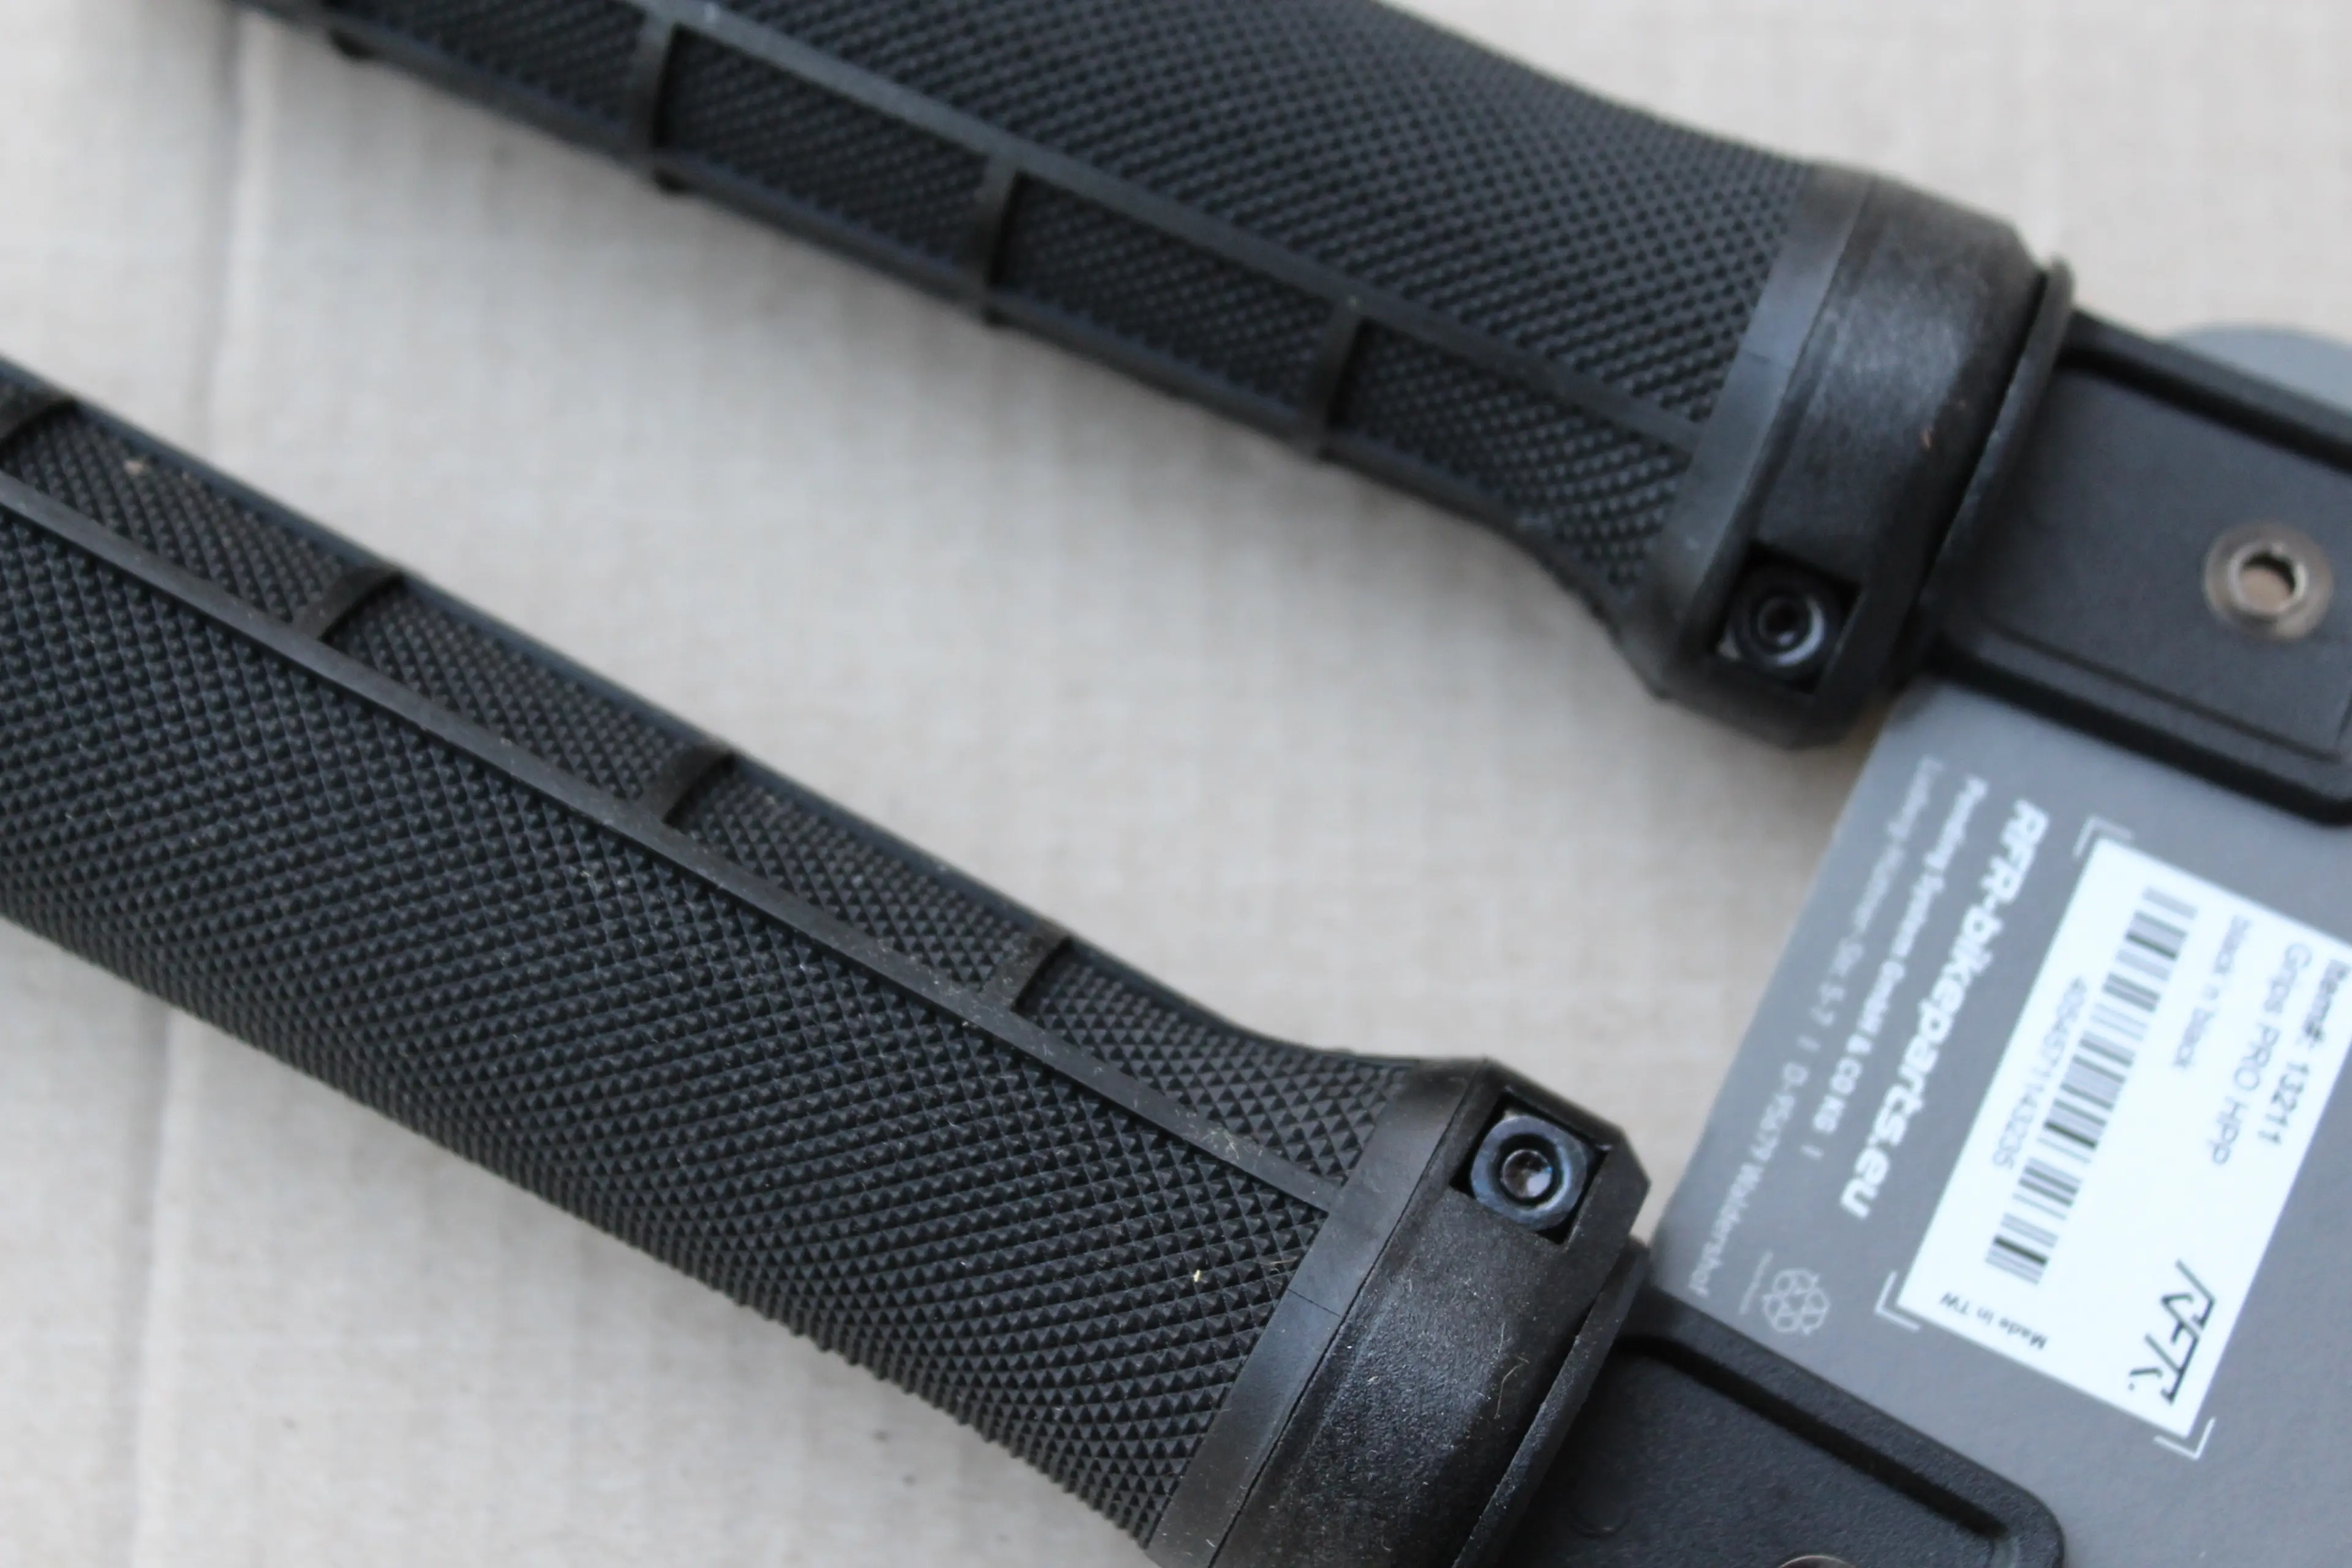 Image RFR Pro HPA Lock-on grips by Cube - negru